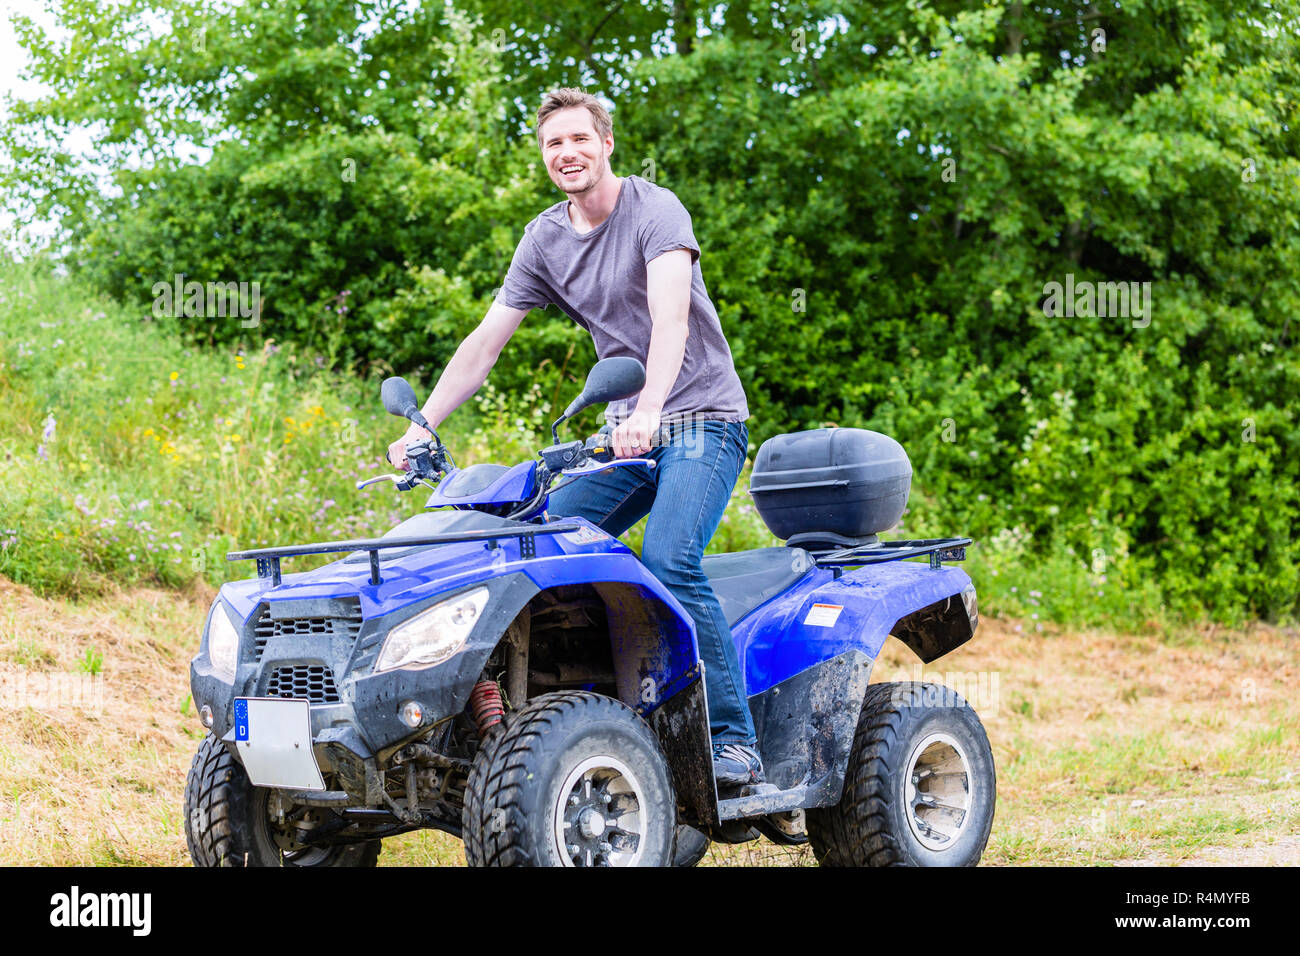 Man driving off-road with quad bike or ATV Stock Photo - Alamy